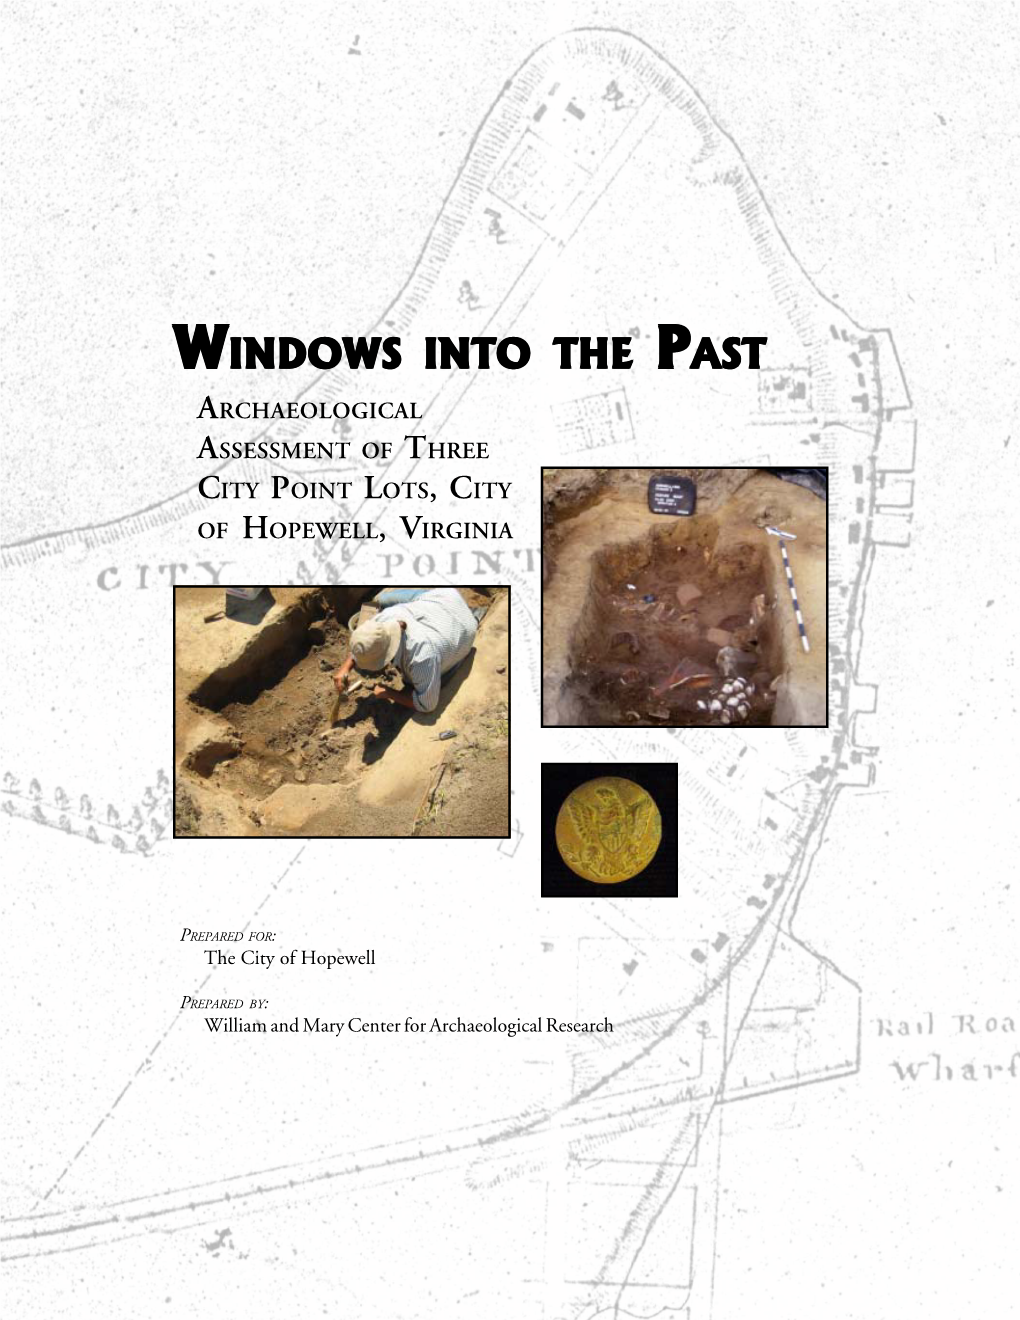 Archaeological Assessment of Three City Point Lots, City of Hopewell, Virginia